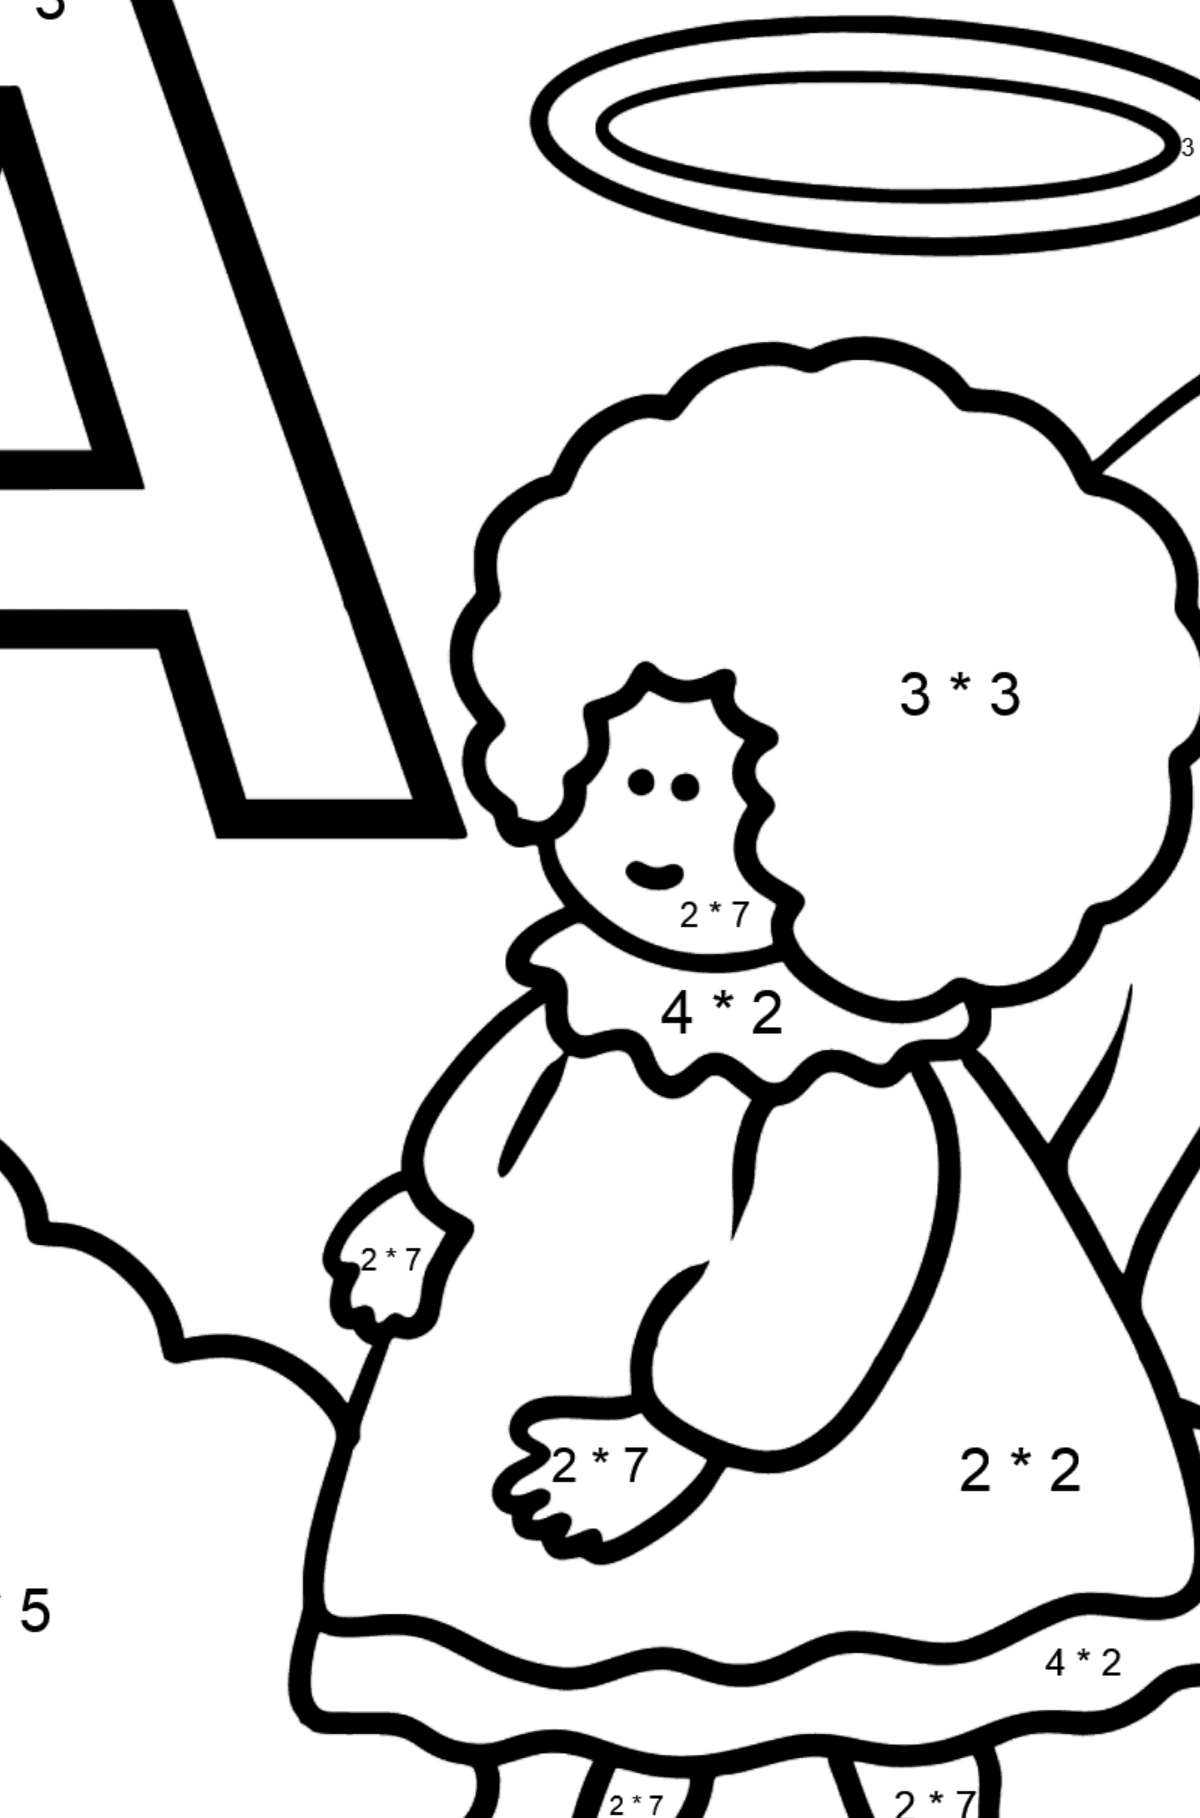 Portuguese Letter A coloring pages - ANJO - Math Coloring - Multiplication for Kids